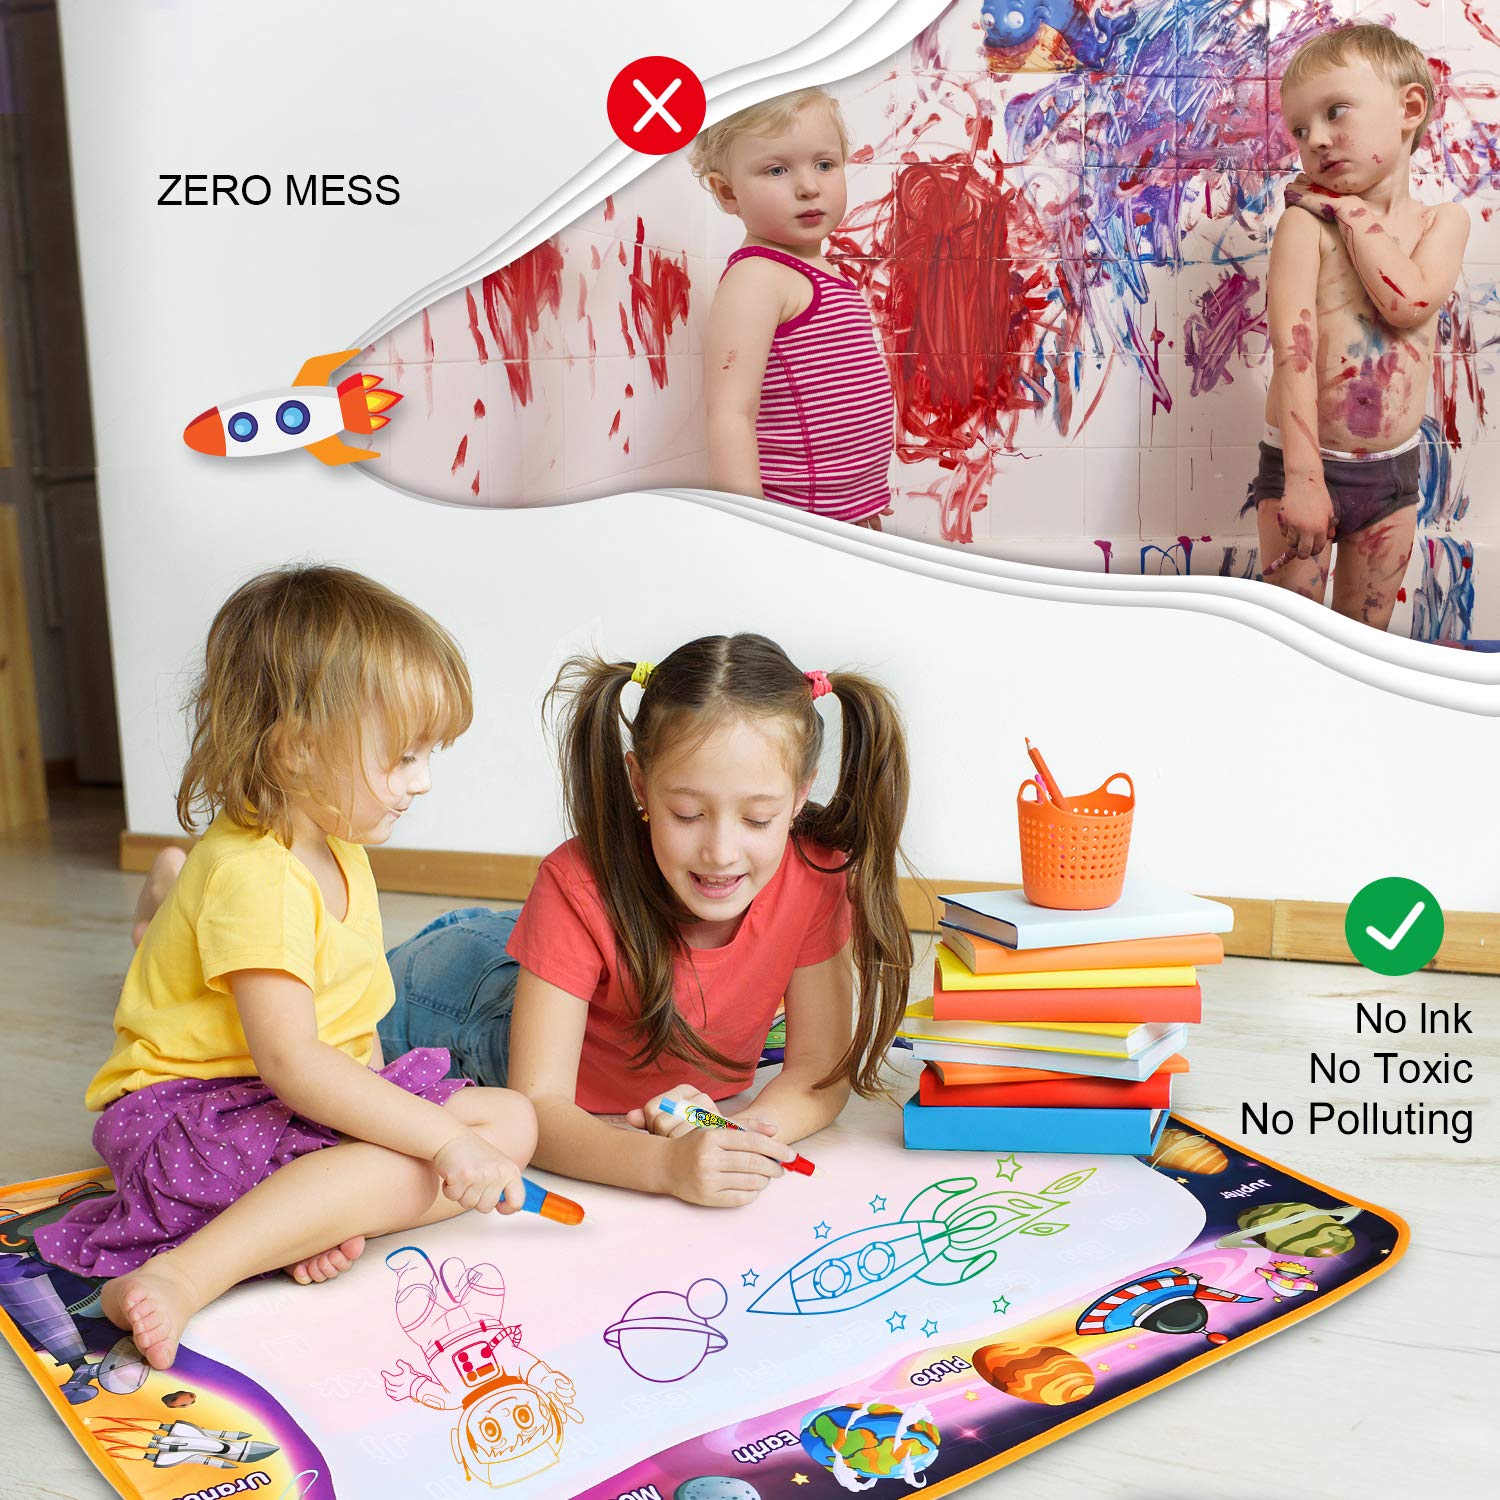 Aqua Magic Mat - Kids Painting Writing Doodle Board Toy - Color Doodle Drawing Mat Bring Magic Pens Educational Toys for Age 2 3 4 5 6 7 8 Year Old Girls Boys Toddler Gift